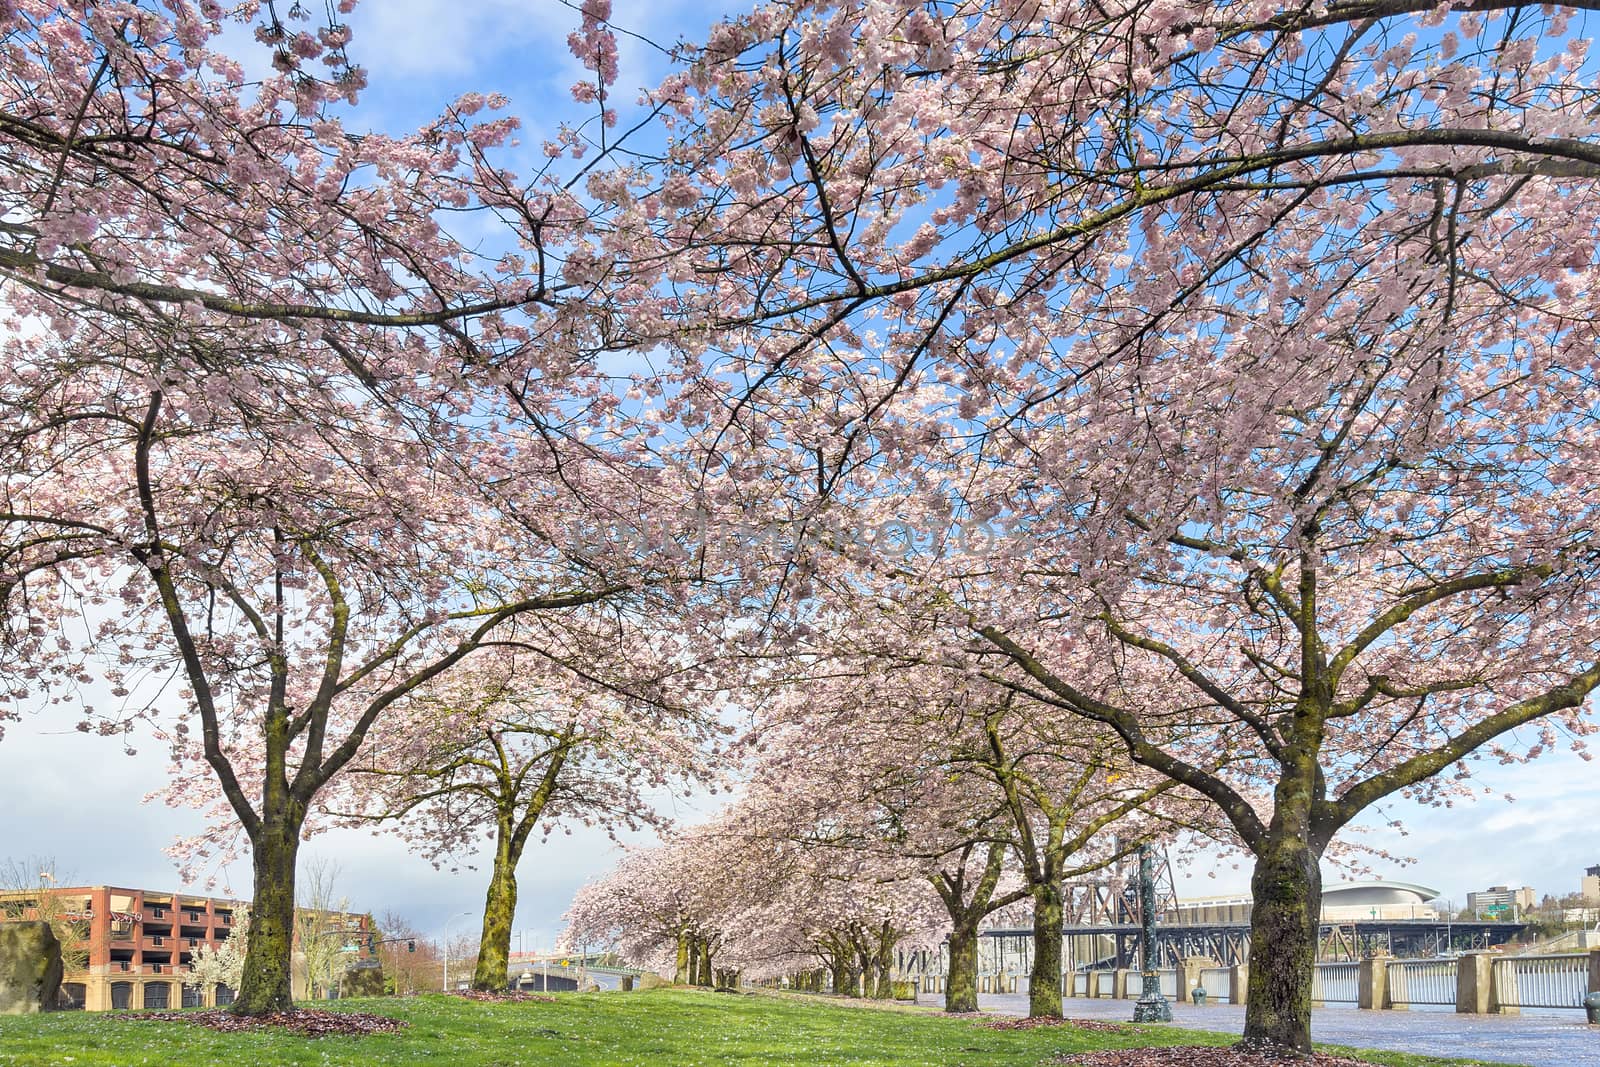 Rows of Cherry Blossom Trees in Spring by jpldesigns